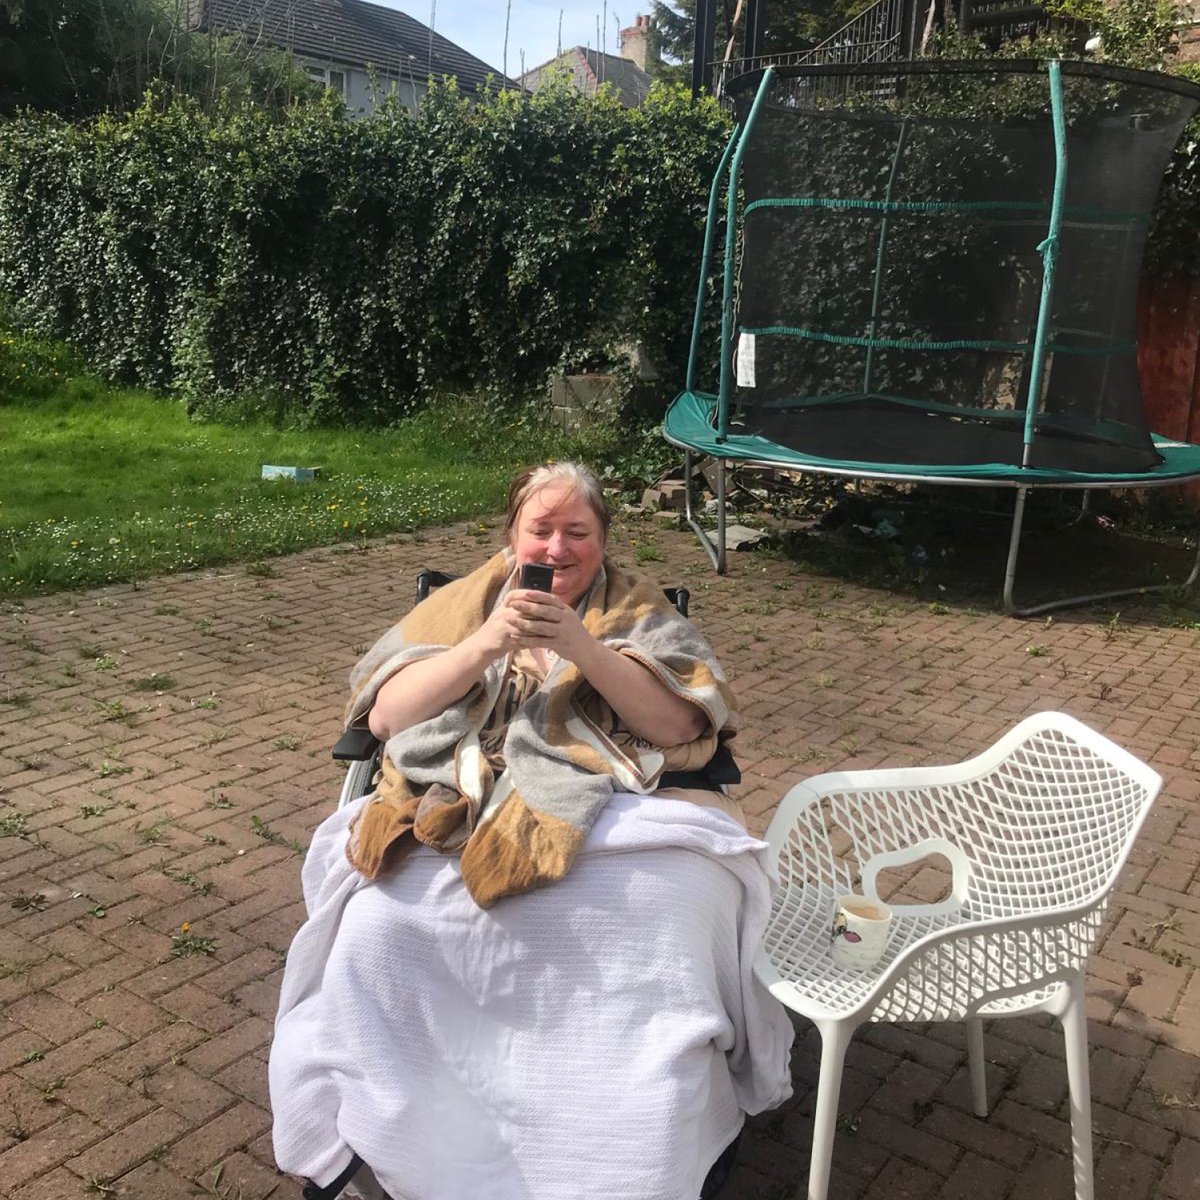 One of our wonderful clients enjoyed her first day outside in a very long time. Great achievement.

#lastminutenursing #careagency #supportworker #careworker #careassistant #caregiver #seniorcare #autismcare #dementiacare #domiciliarycare #carer #wirral #neston #liverpool